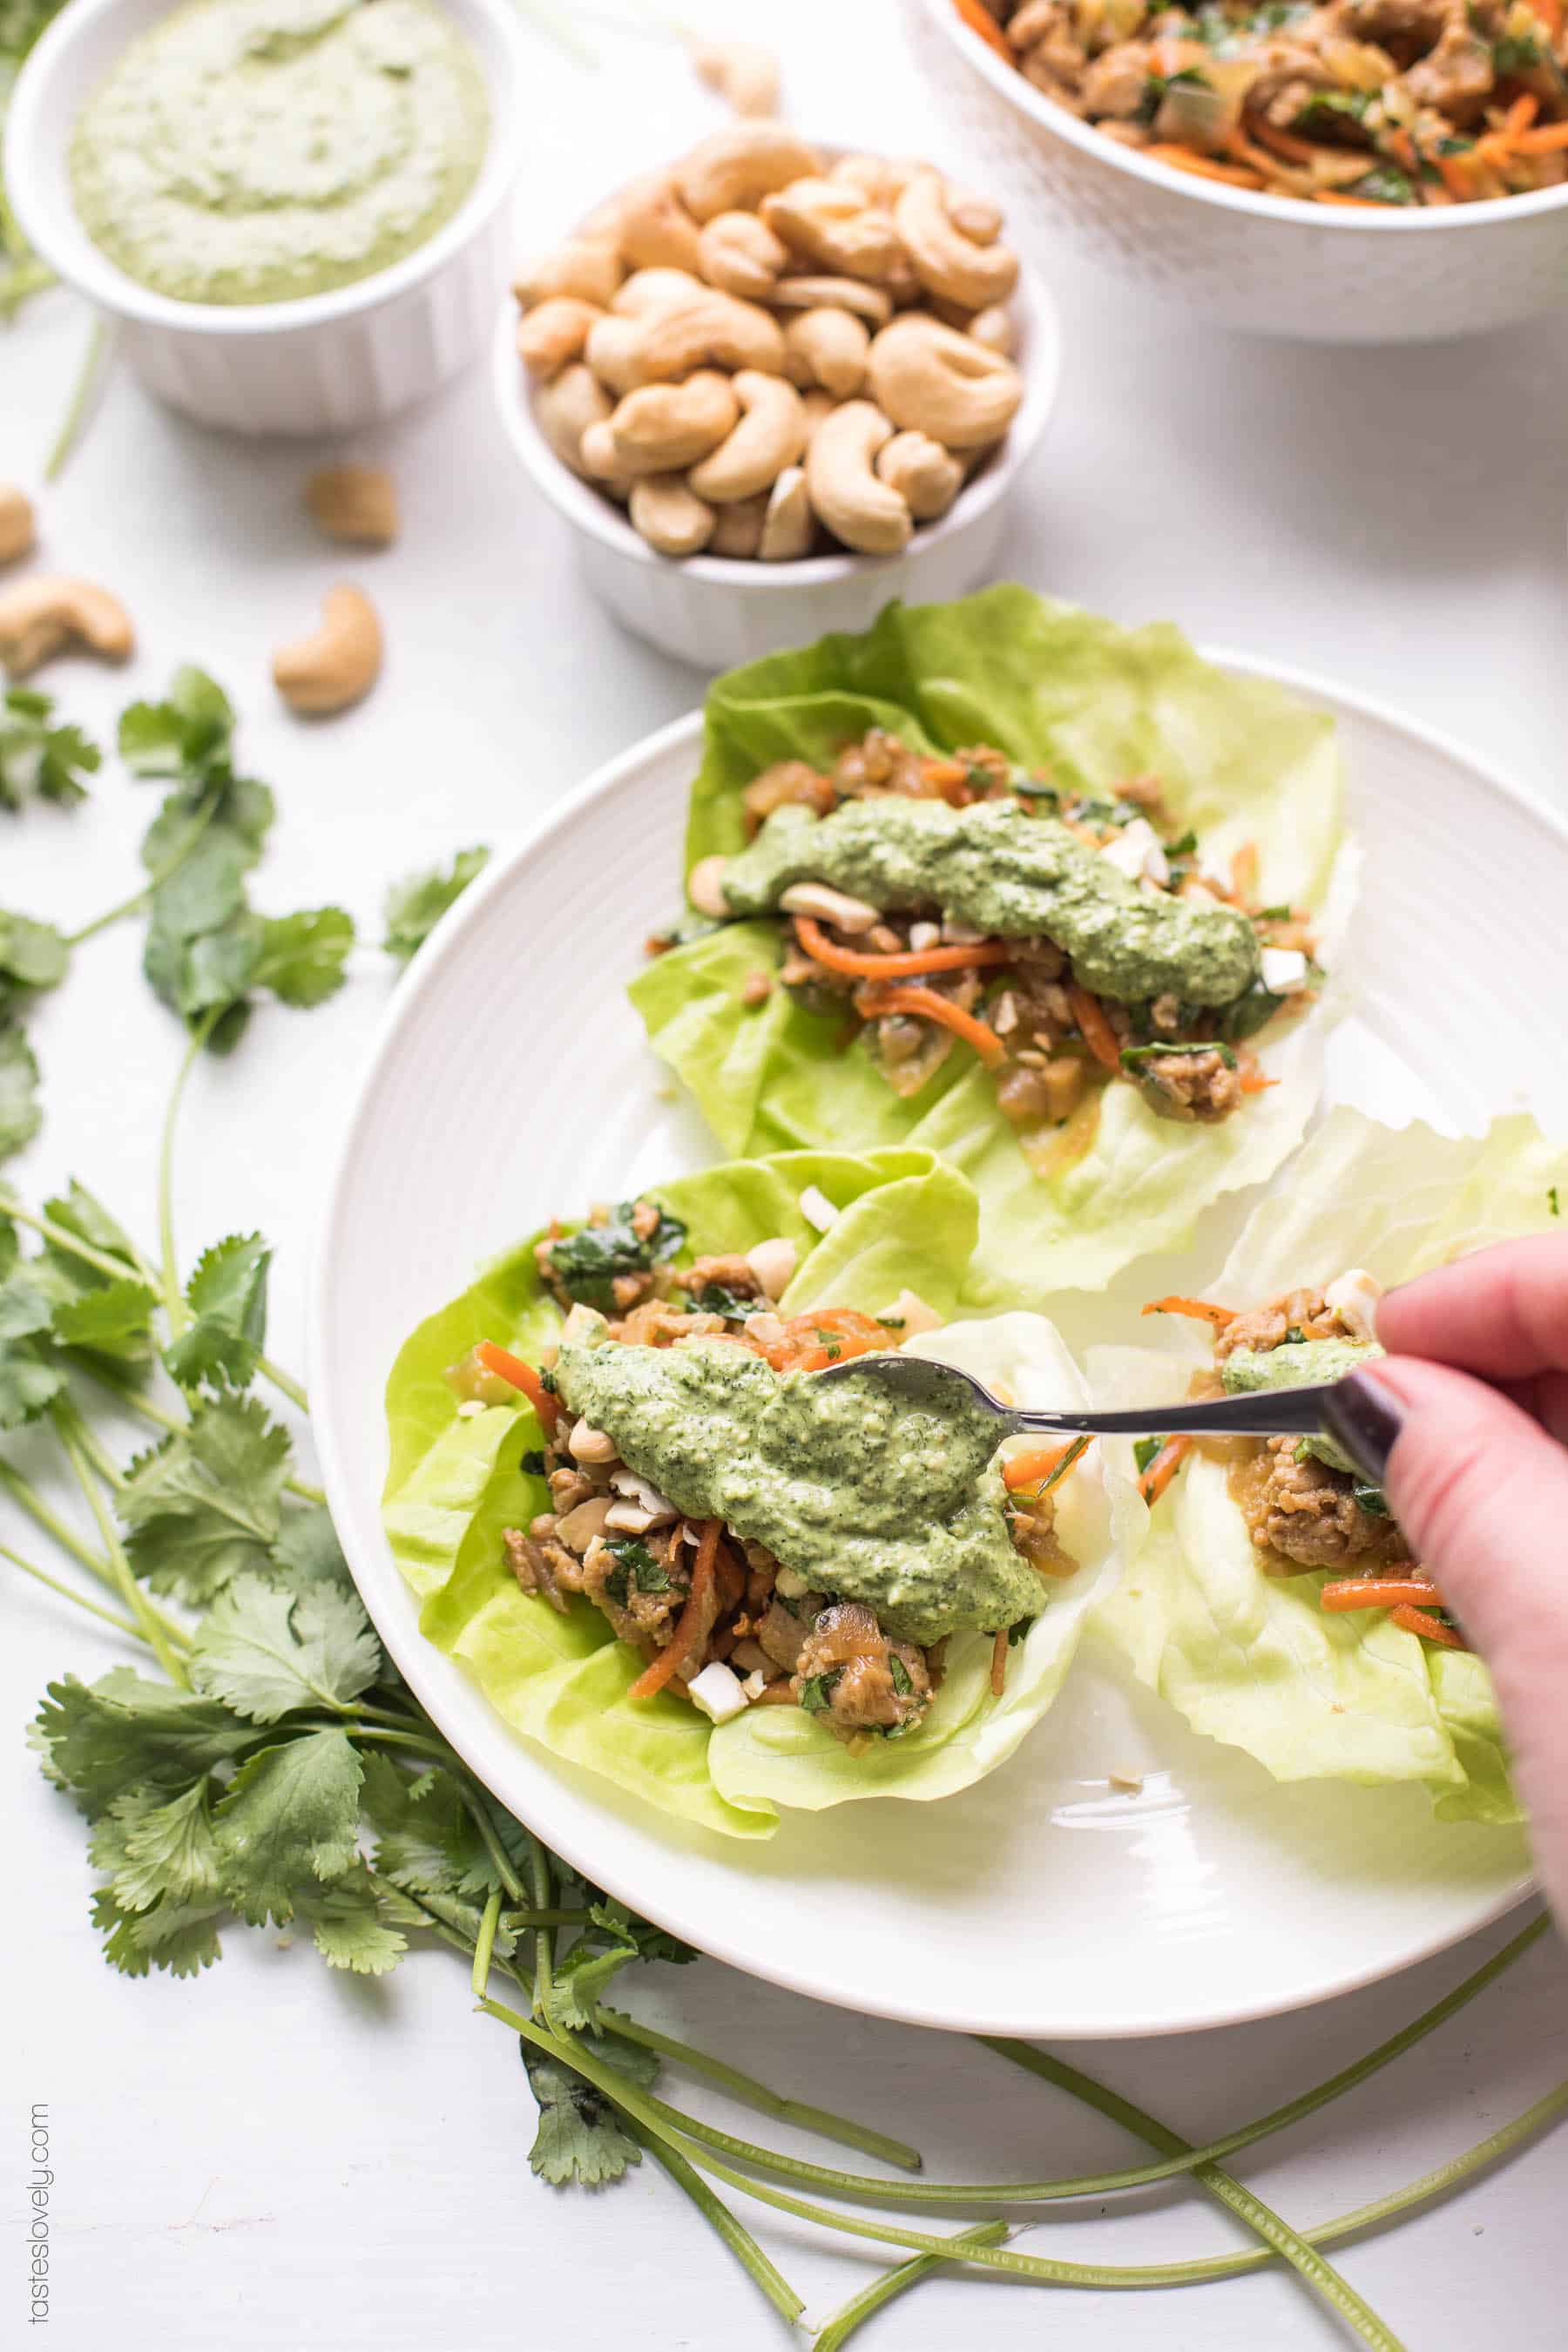 Paleo + Whole30 Thai Chicken Lettuce Wraps - a quick and healthy dinner recipe with ground chicken, sauteed onions, a thai sauce, cilantro and shredded carrots. Topped with a bright and fresh herby green dressing and cashews. #paleo #whole30 #glutenfree #grainfree #dairyfree #sugarfree #keto #cleaneating #realfood